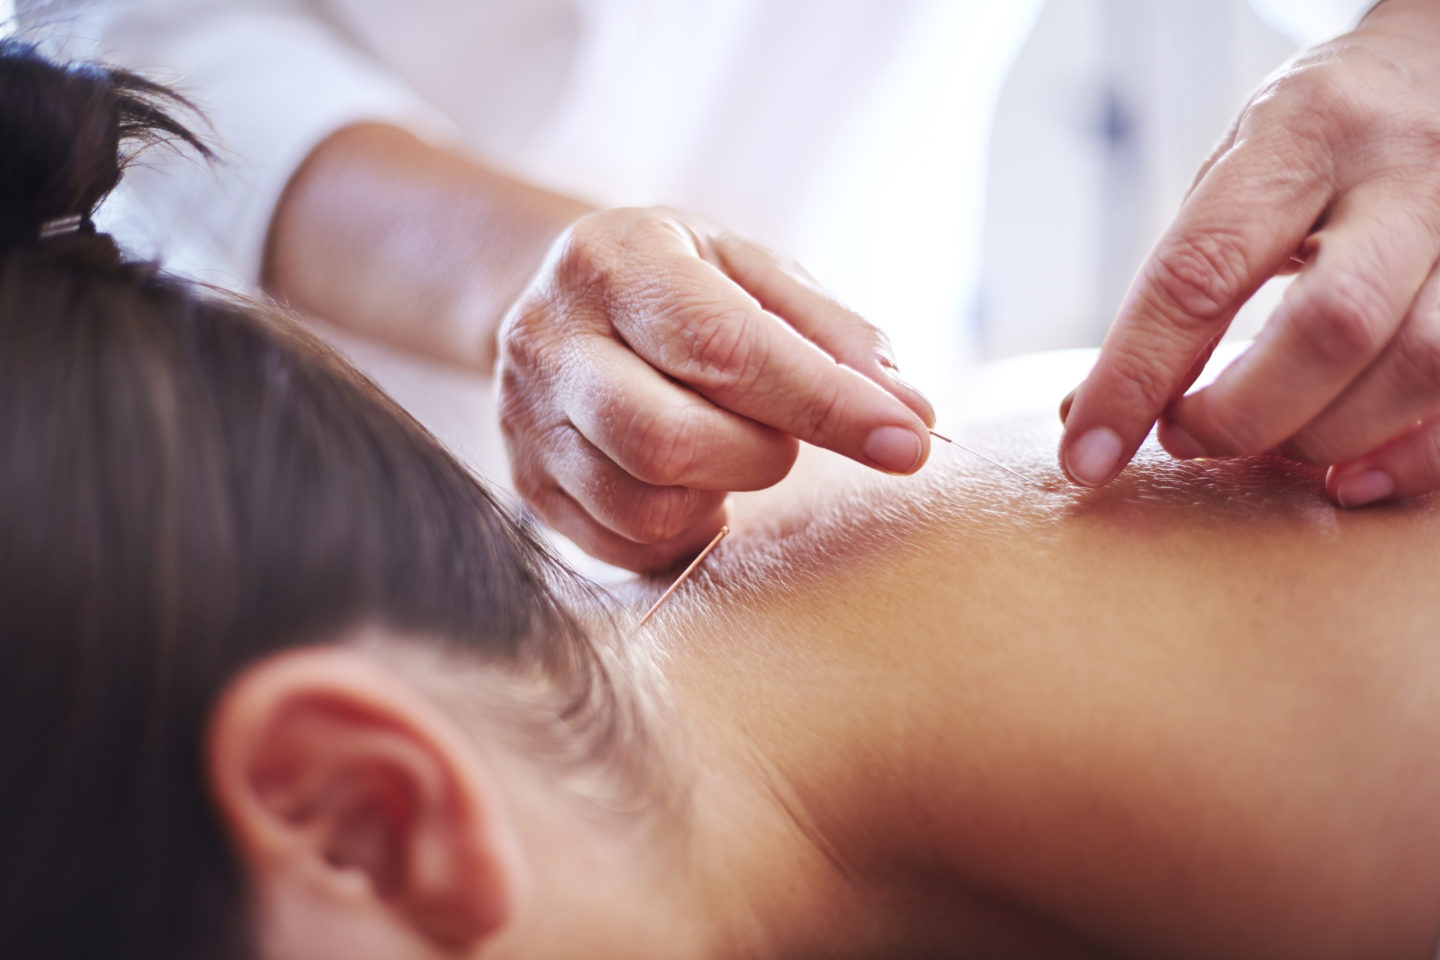 Can Acupuncture Help Treat Women’s Health Issues?